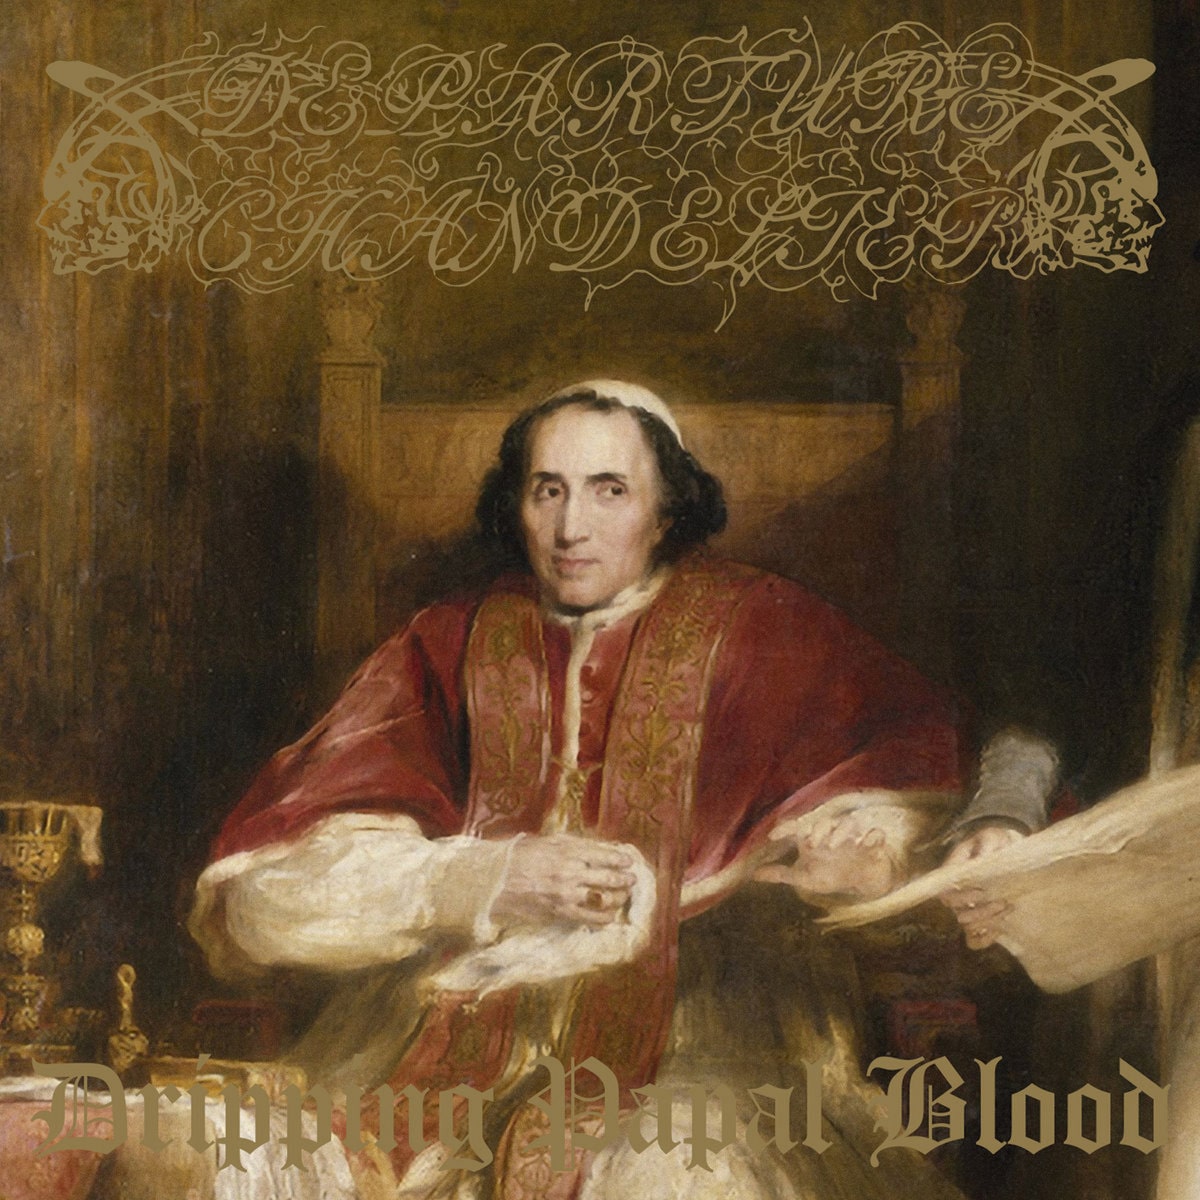 Departure Chandelier – Dripping Papal Blood 3 MCD-min